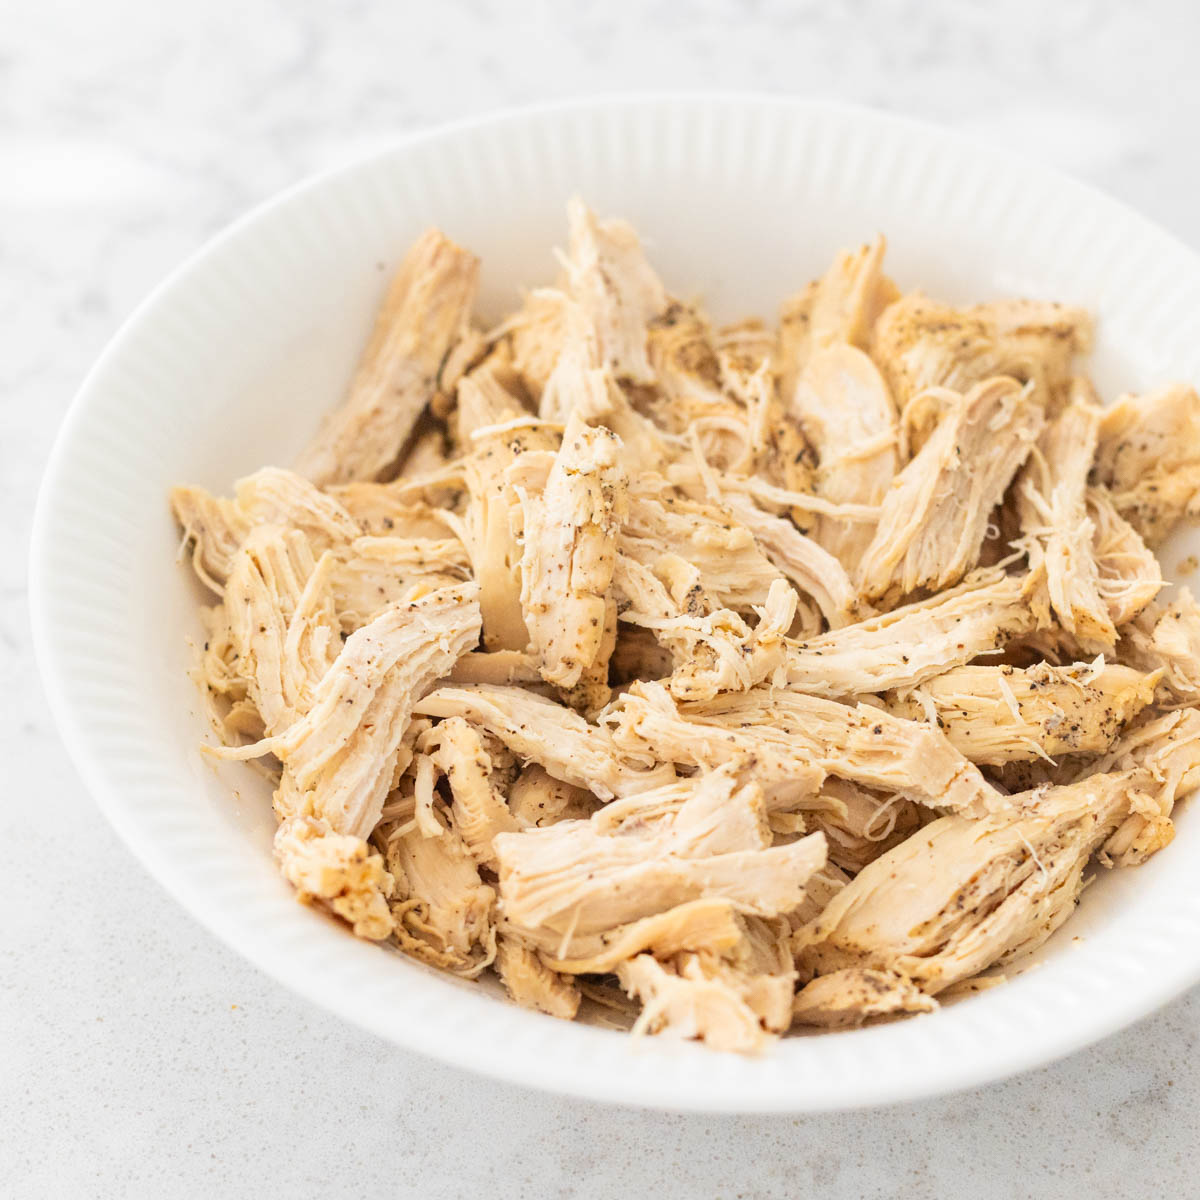 The white bowl of shredded chicken meat.